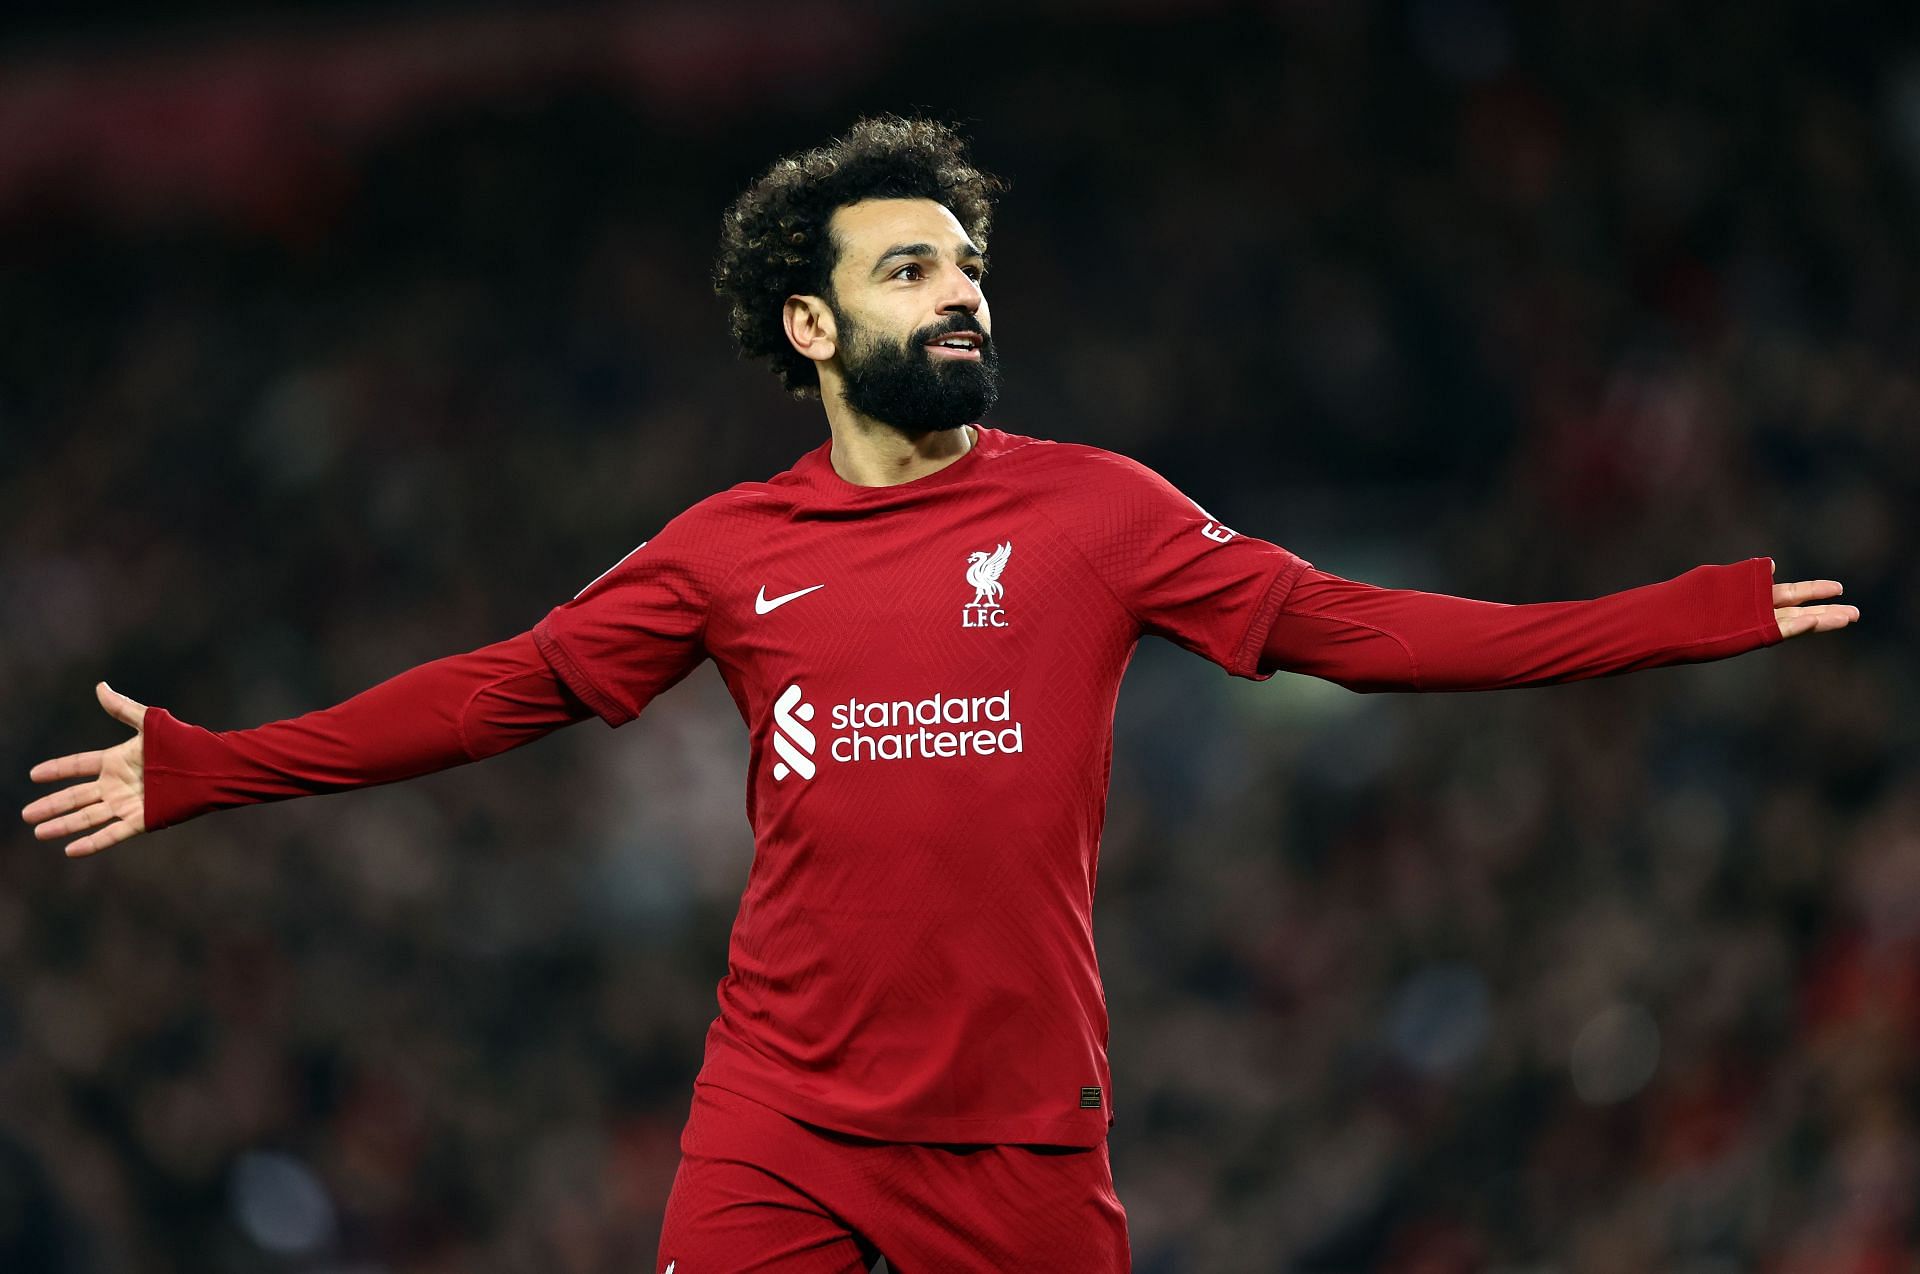 Salah is one of the best left-footed players in the Premier League